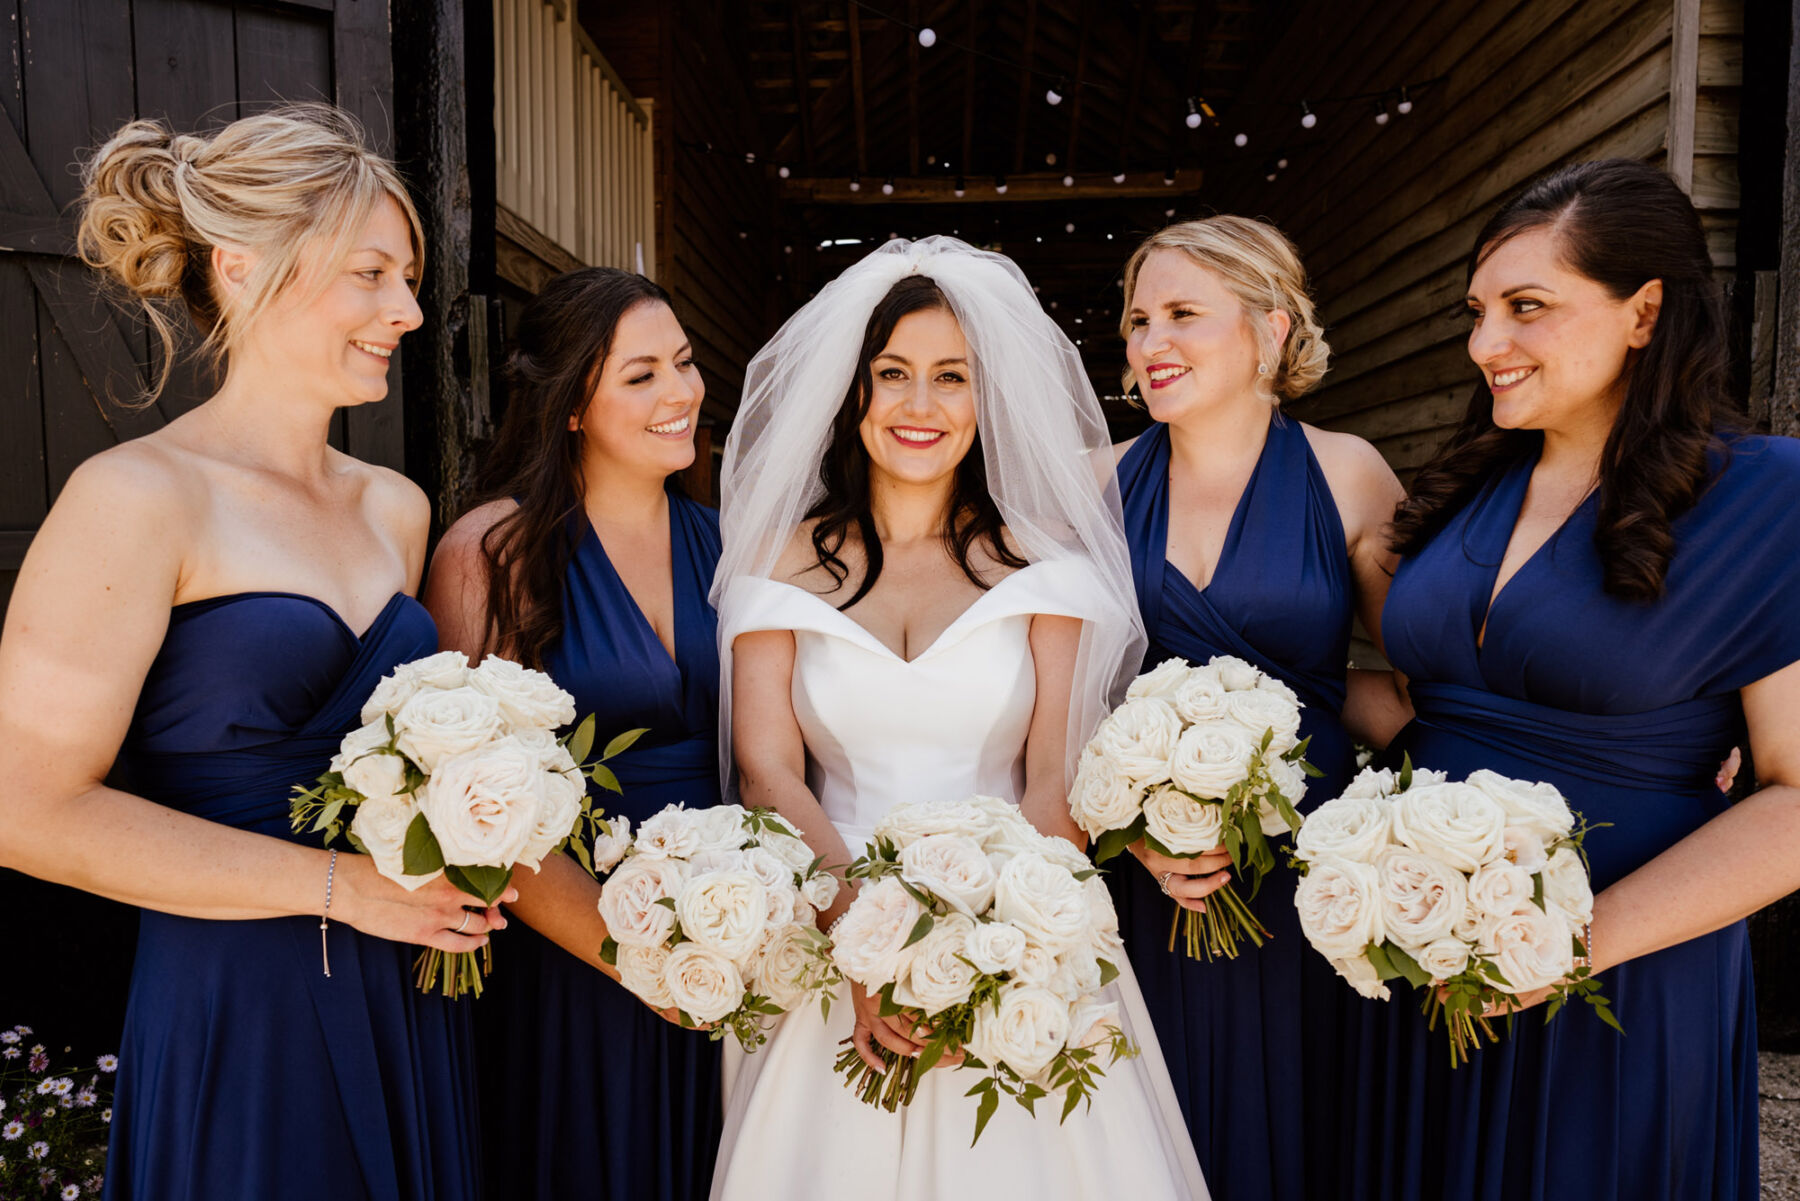 Bridesmaids wearing Navy Blue dresses & carrying bouquets of white roses. Bride in Suzanne Neville wedding dress.